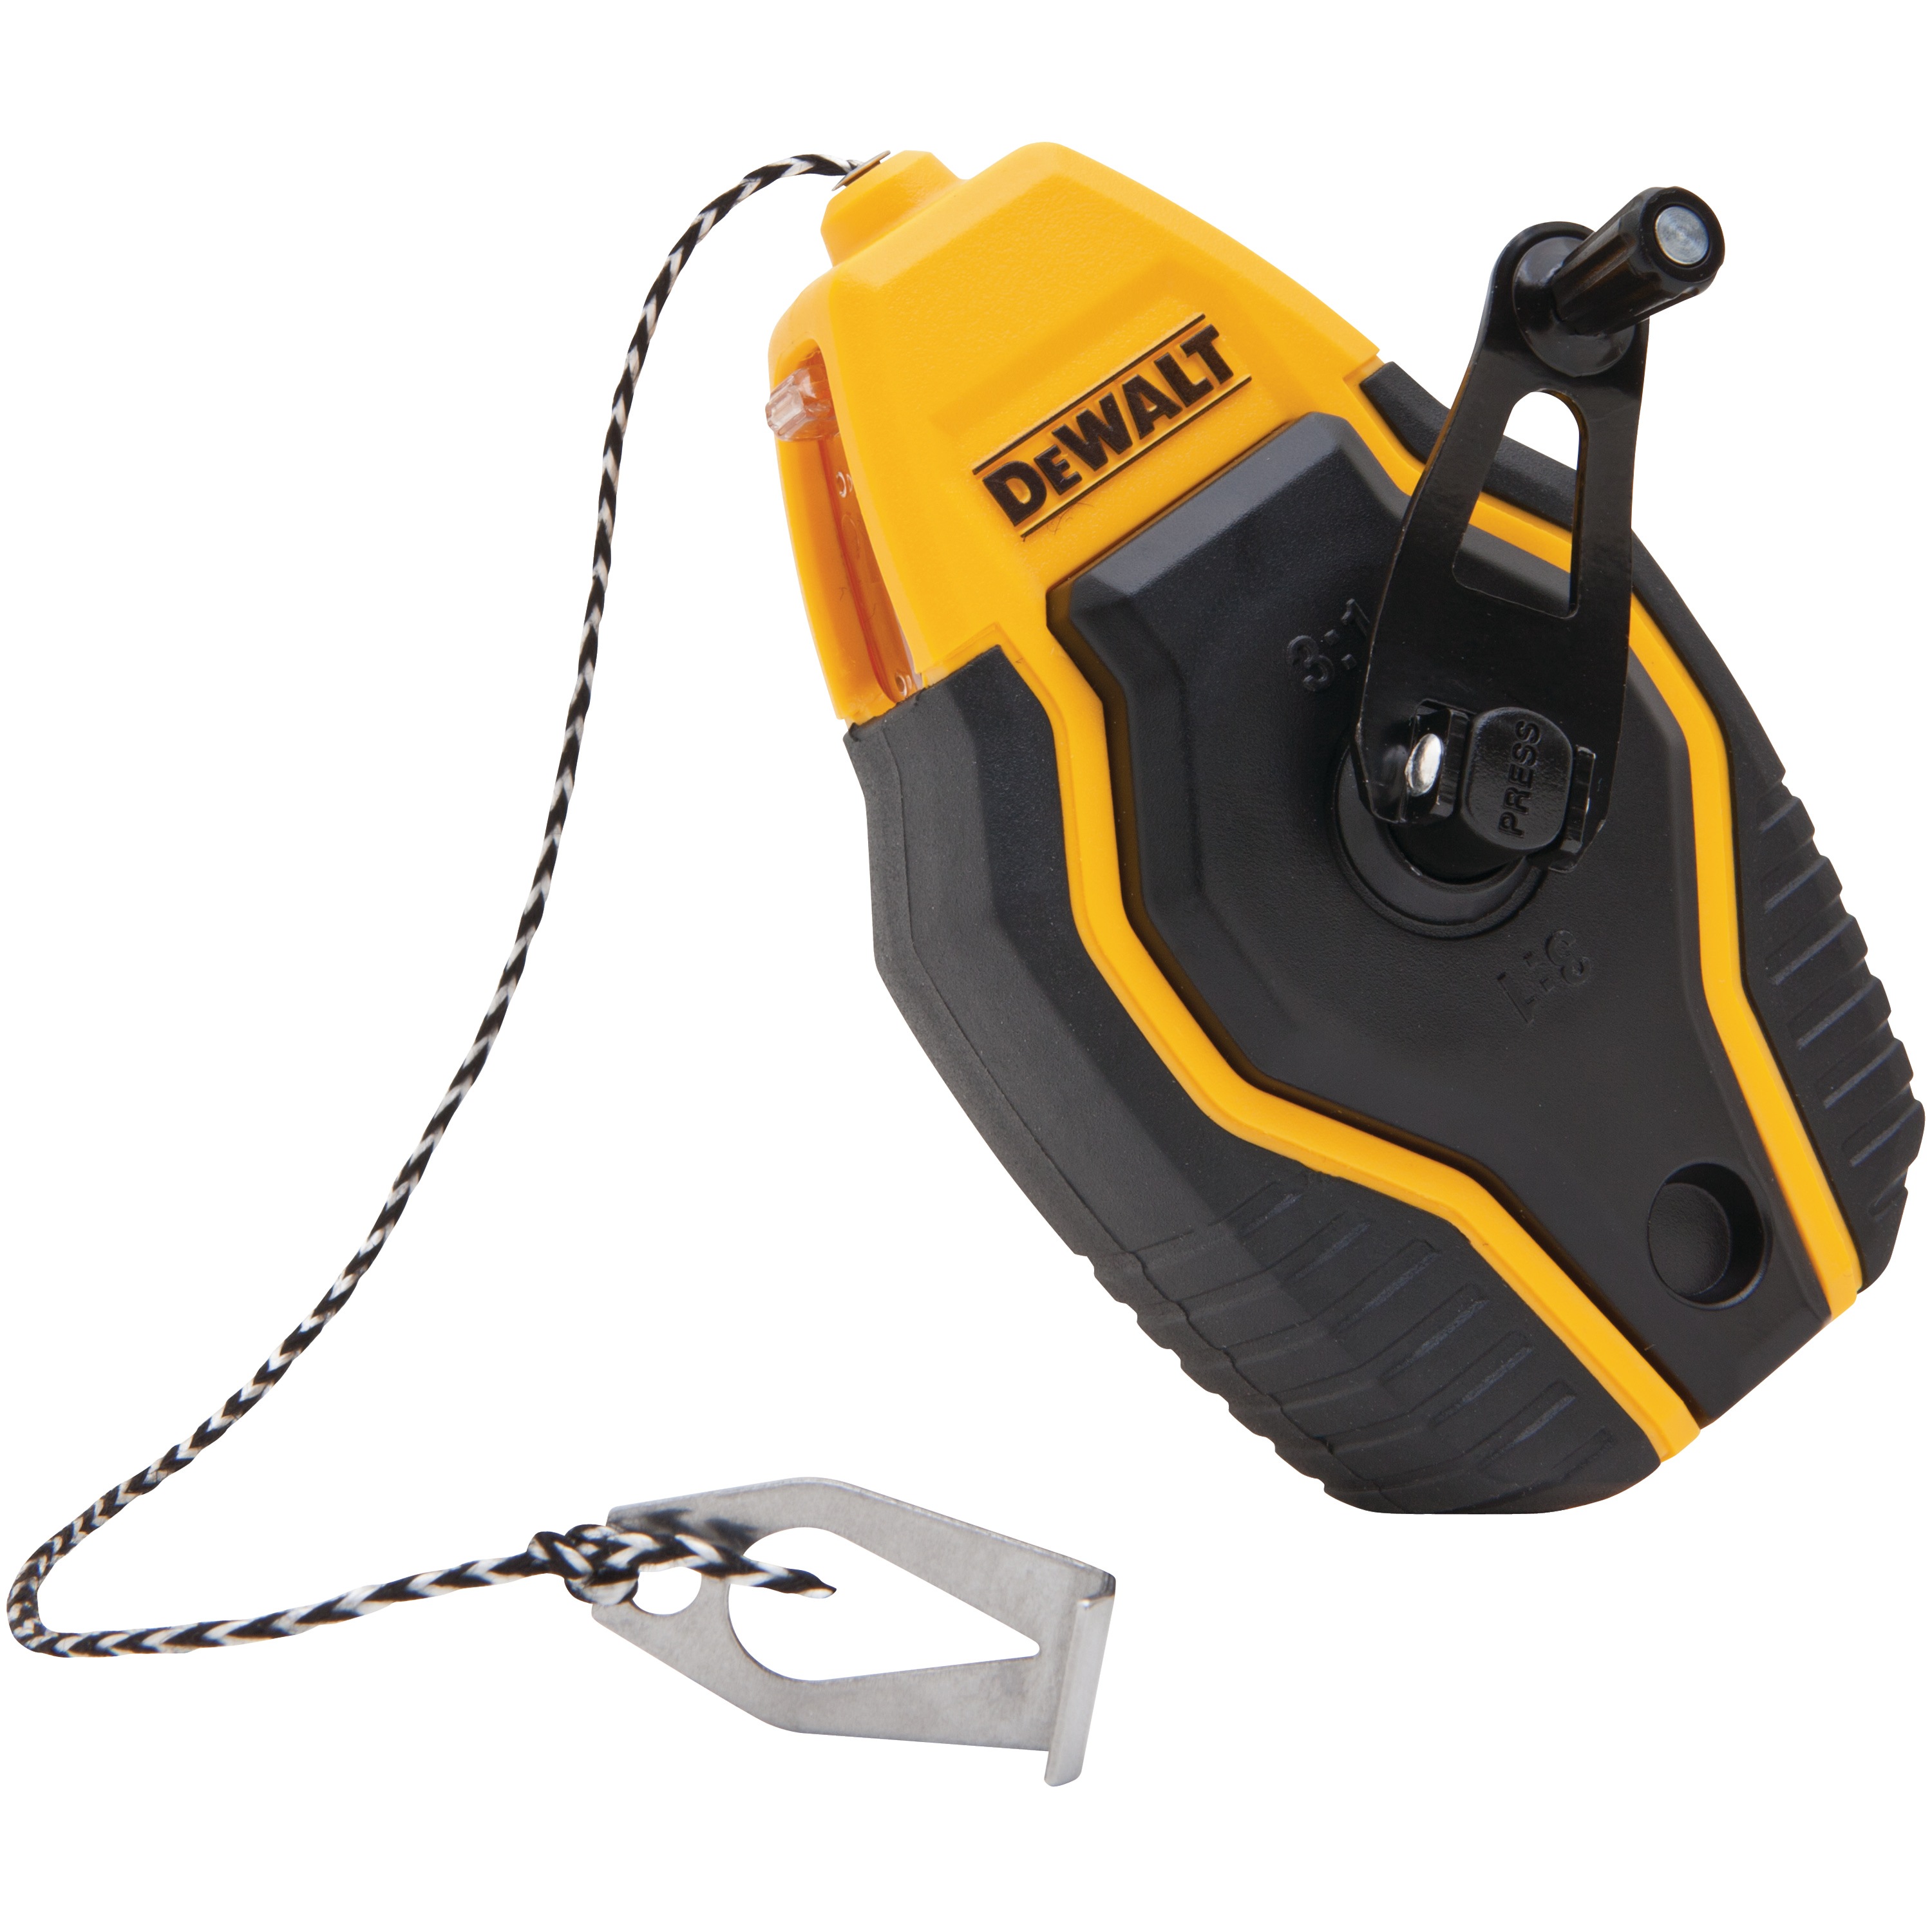 Profile of Compact Chalk Reel unlatched and unhooked.